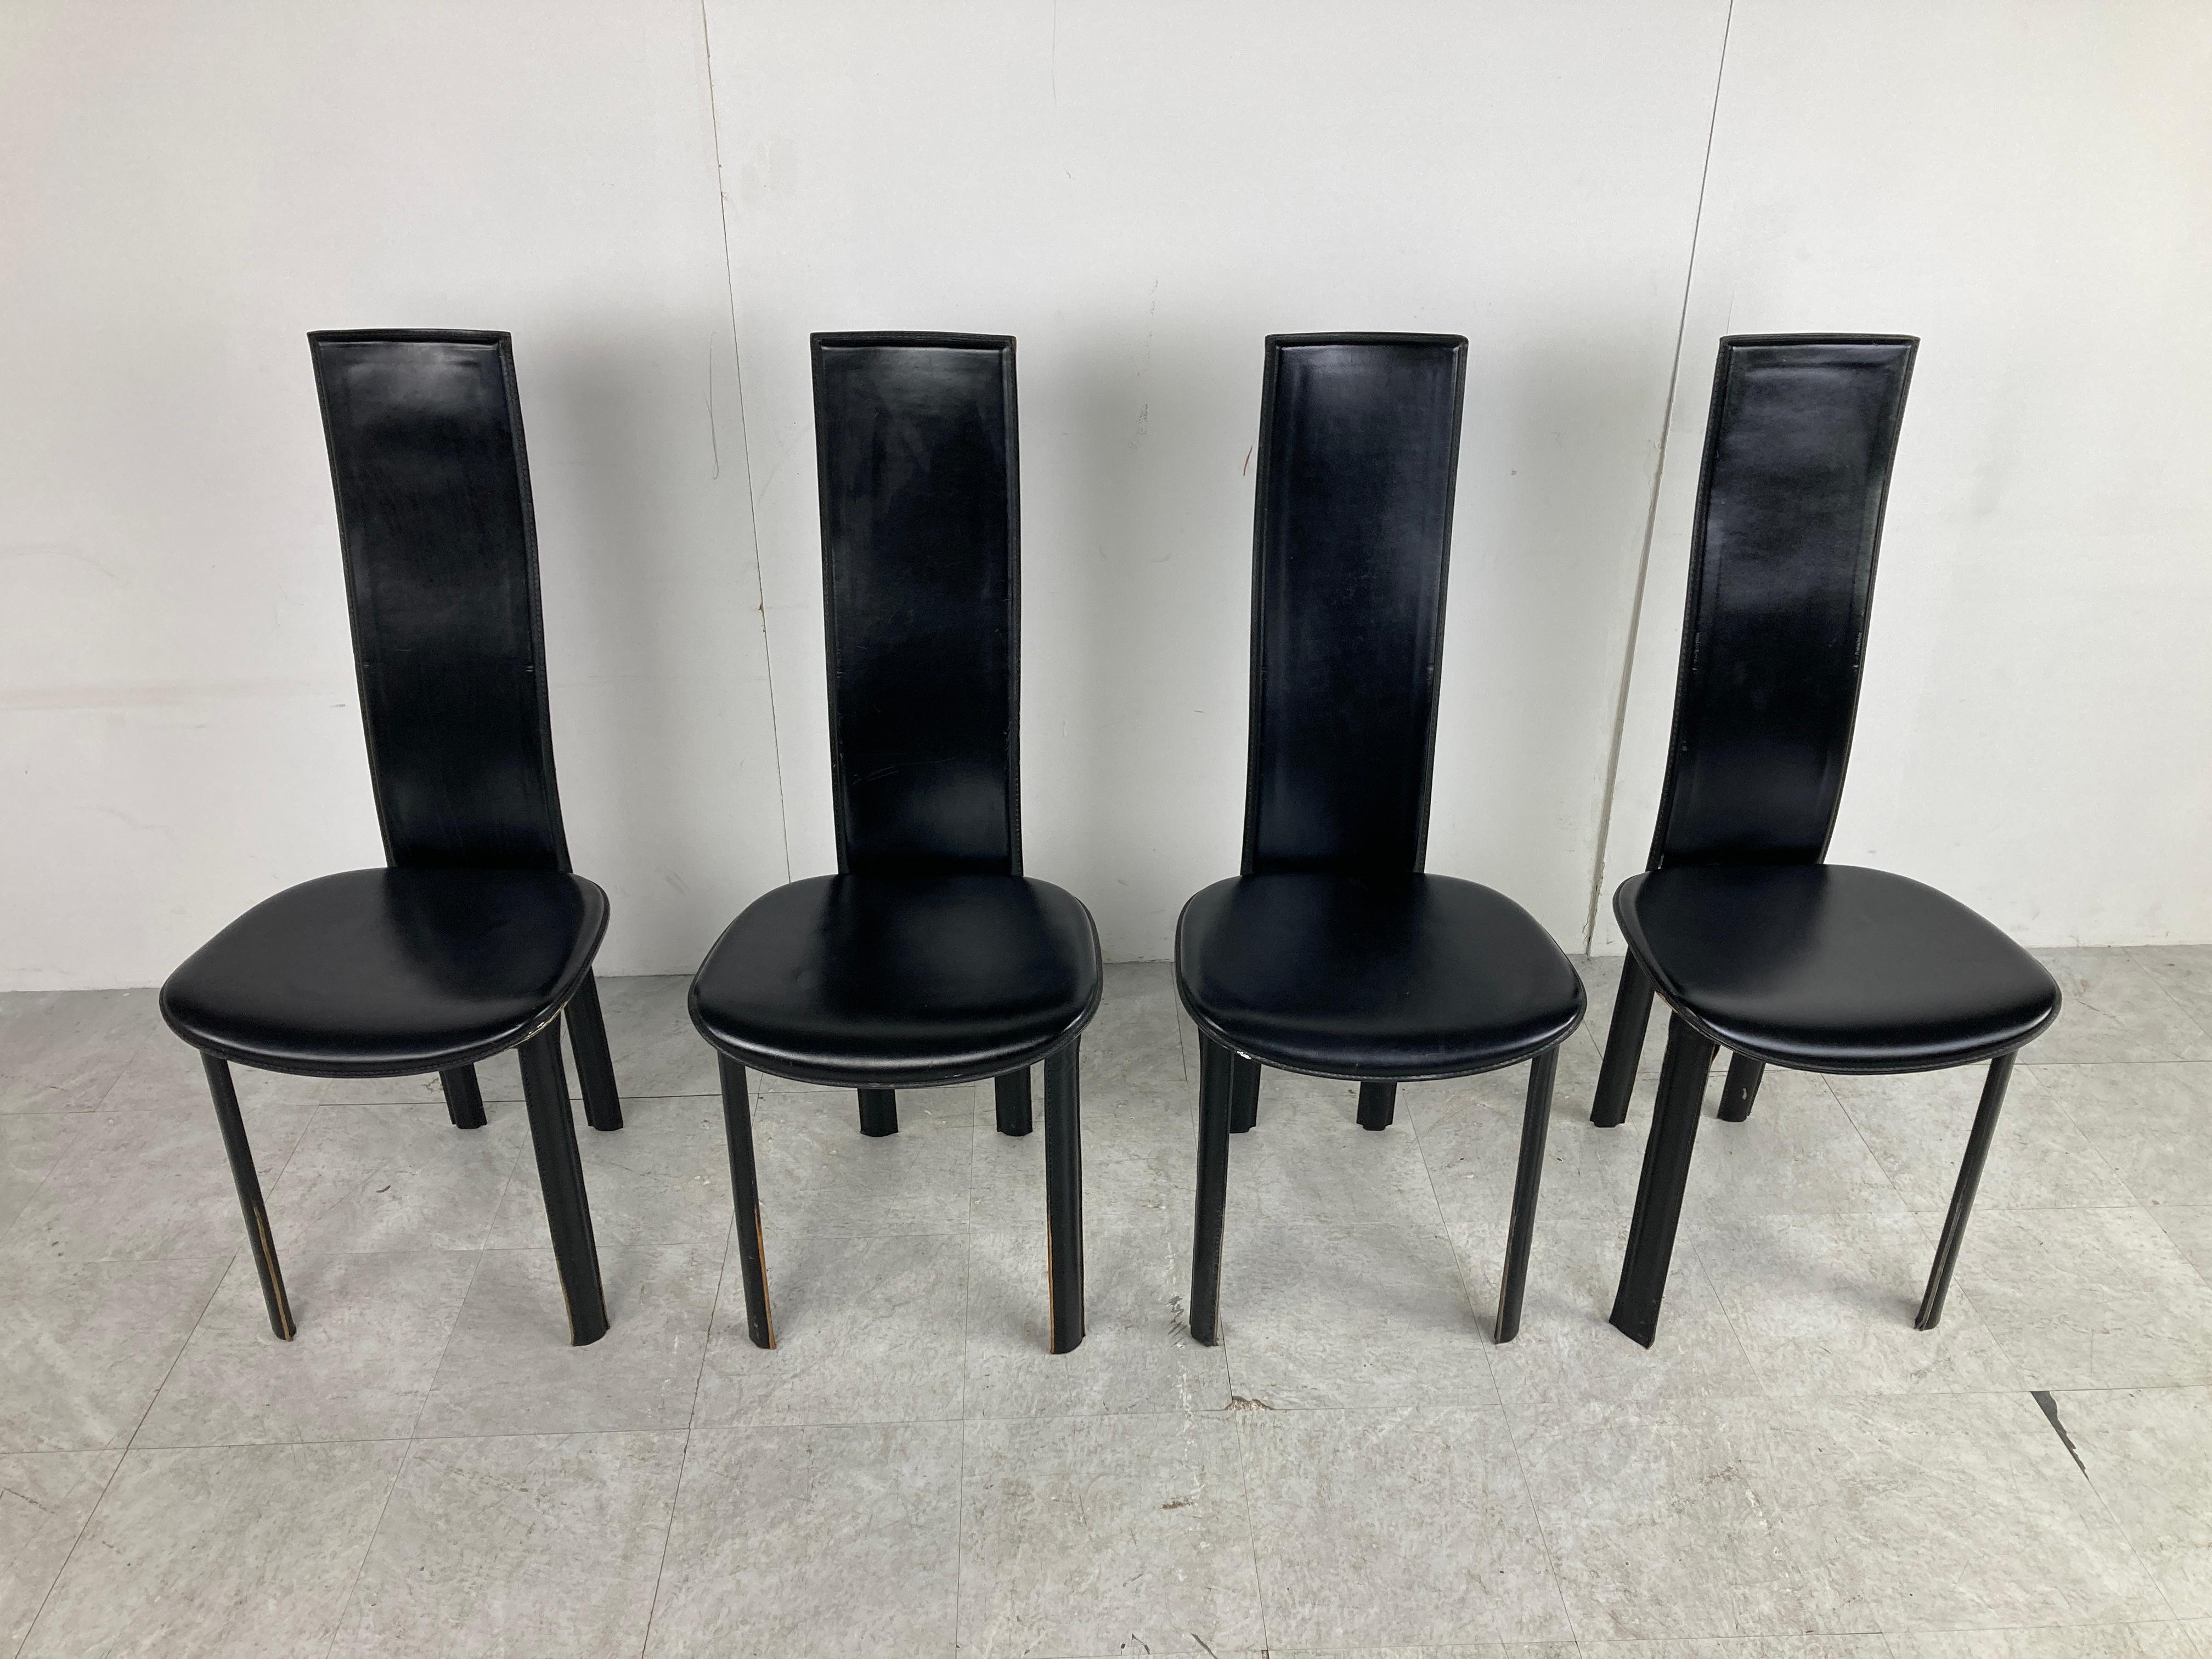 Italian Vintage Black Leather Dining Chairs, Set of 4, 1980s